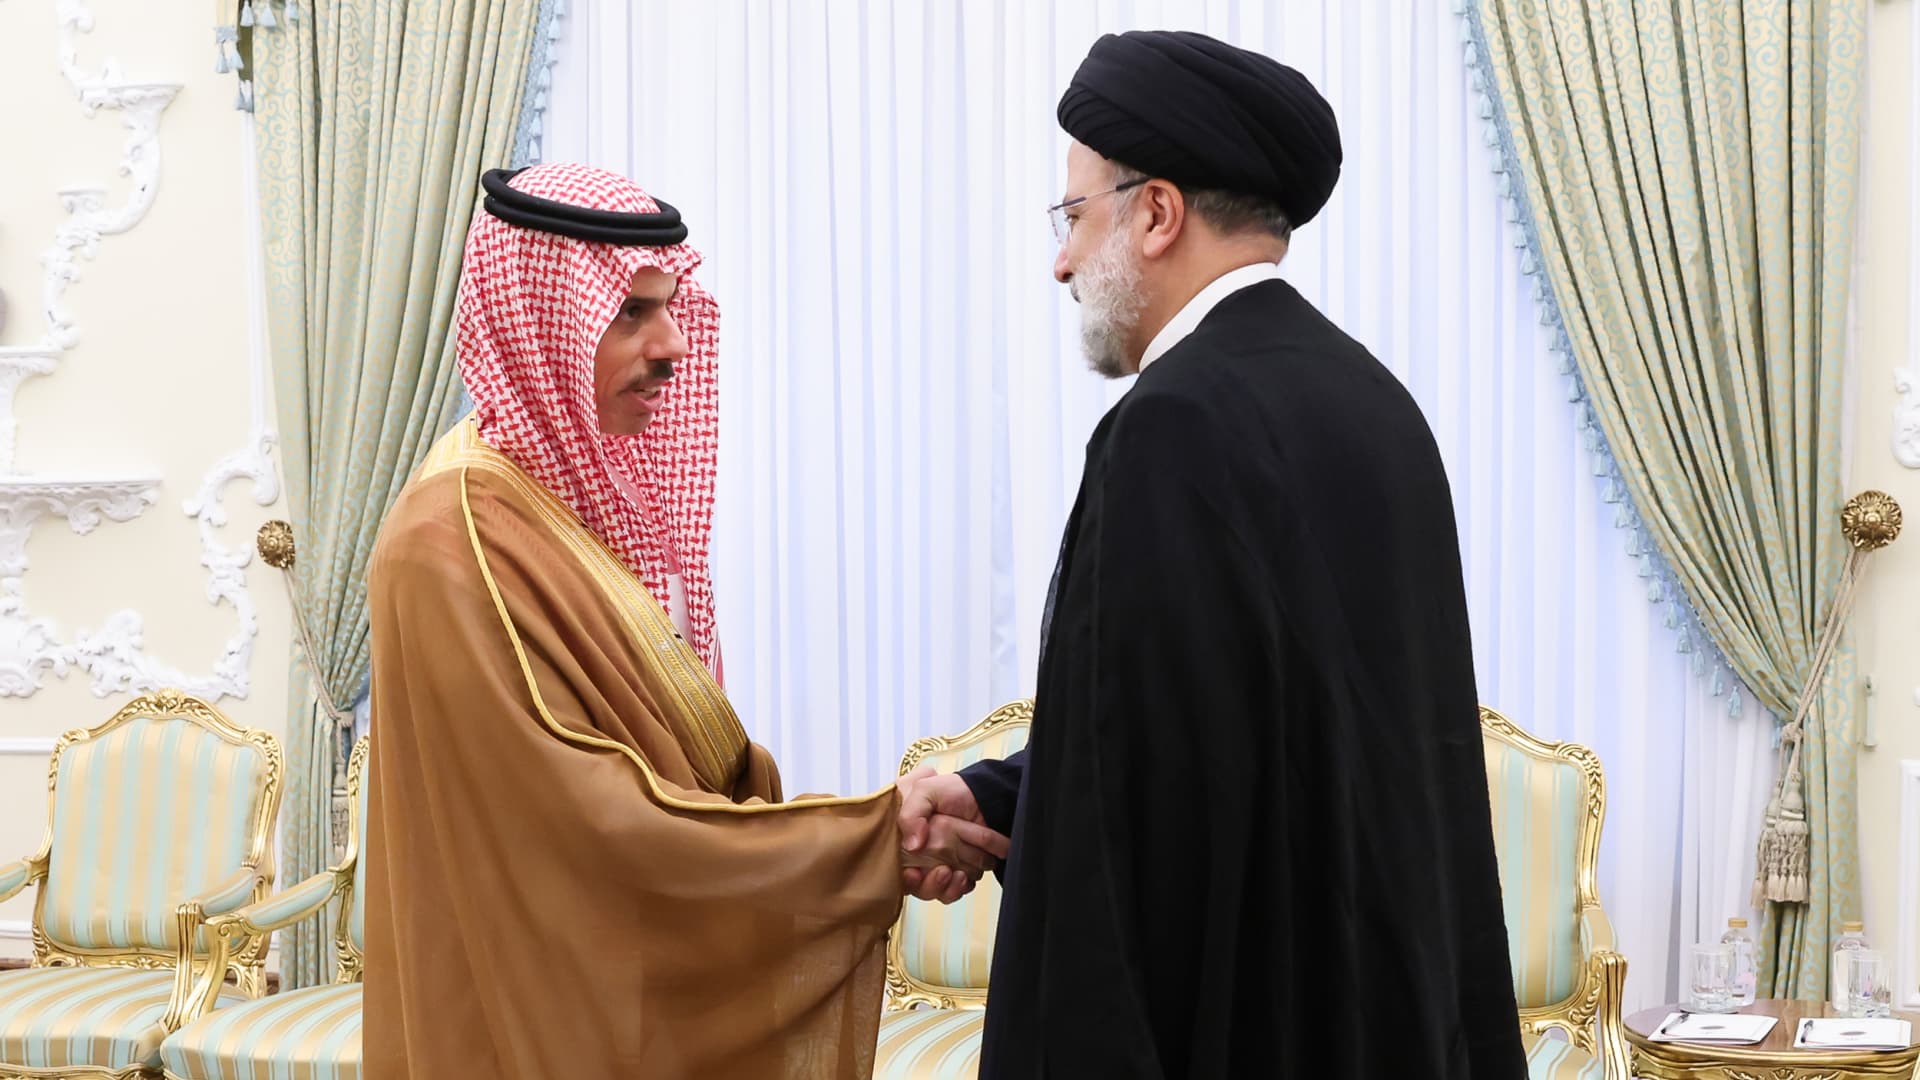 ‘Things will just have to be accepted as tense’: Saudi-Iran relations have a long way to go despite rapprochement efforts